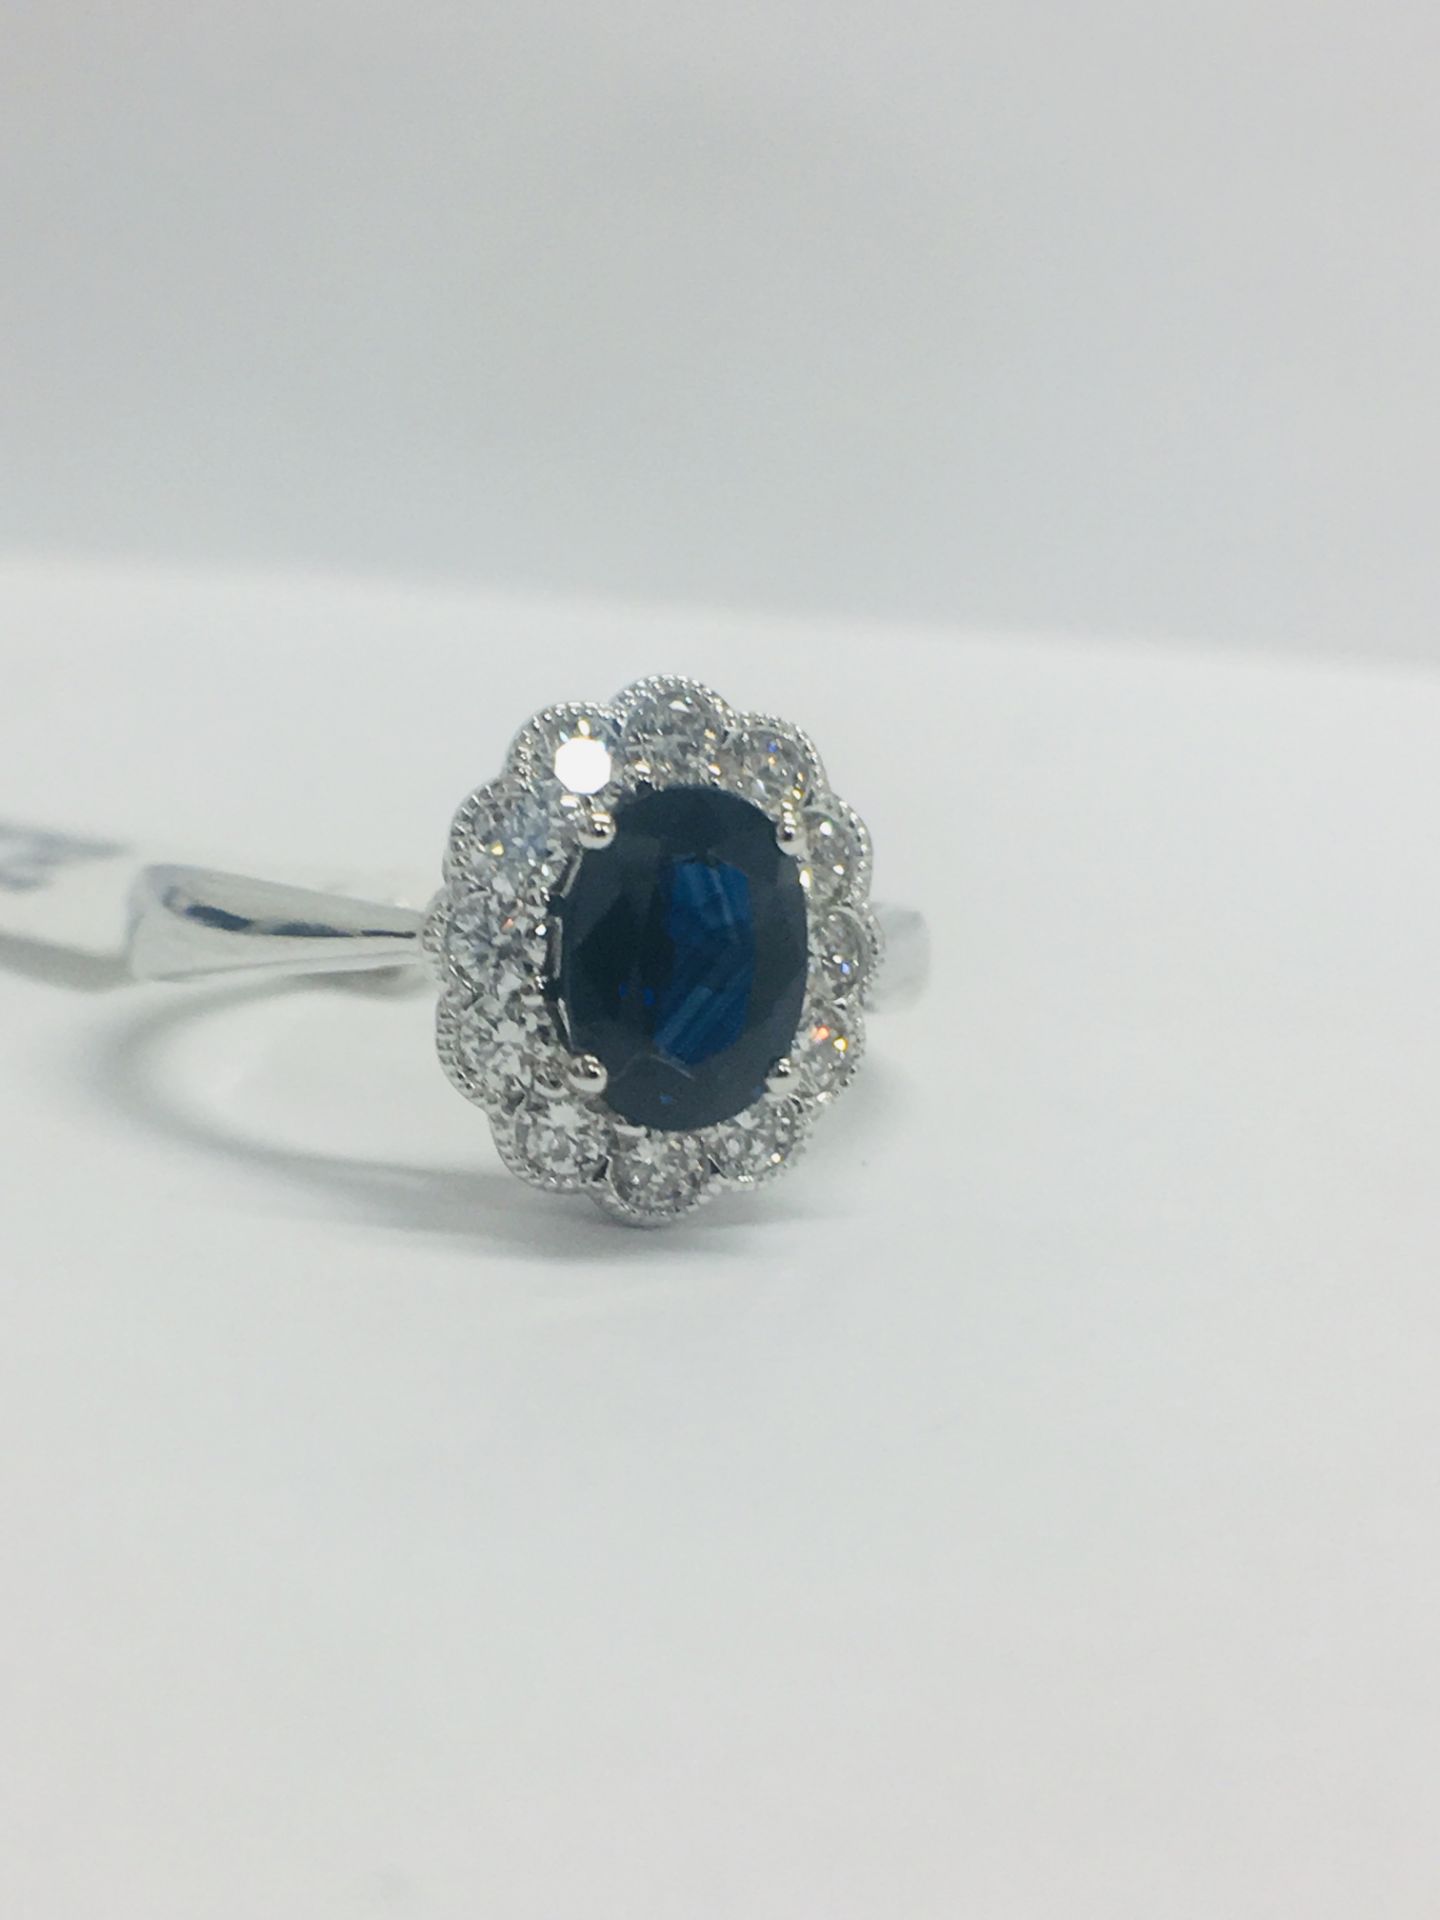 18ct White Gold Sapphire Diamond Cluster Ring - Image 2 of 9